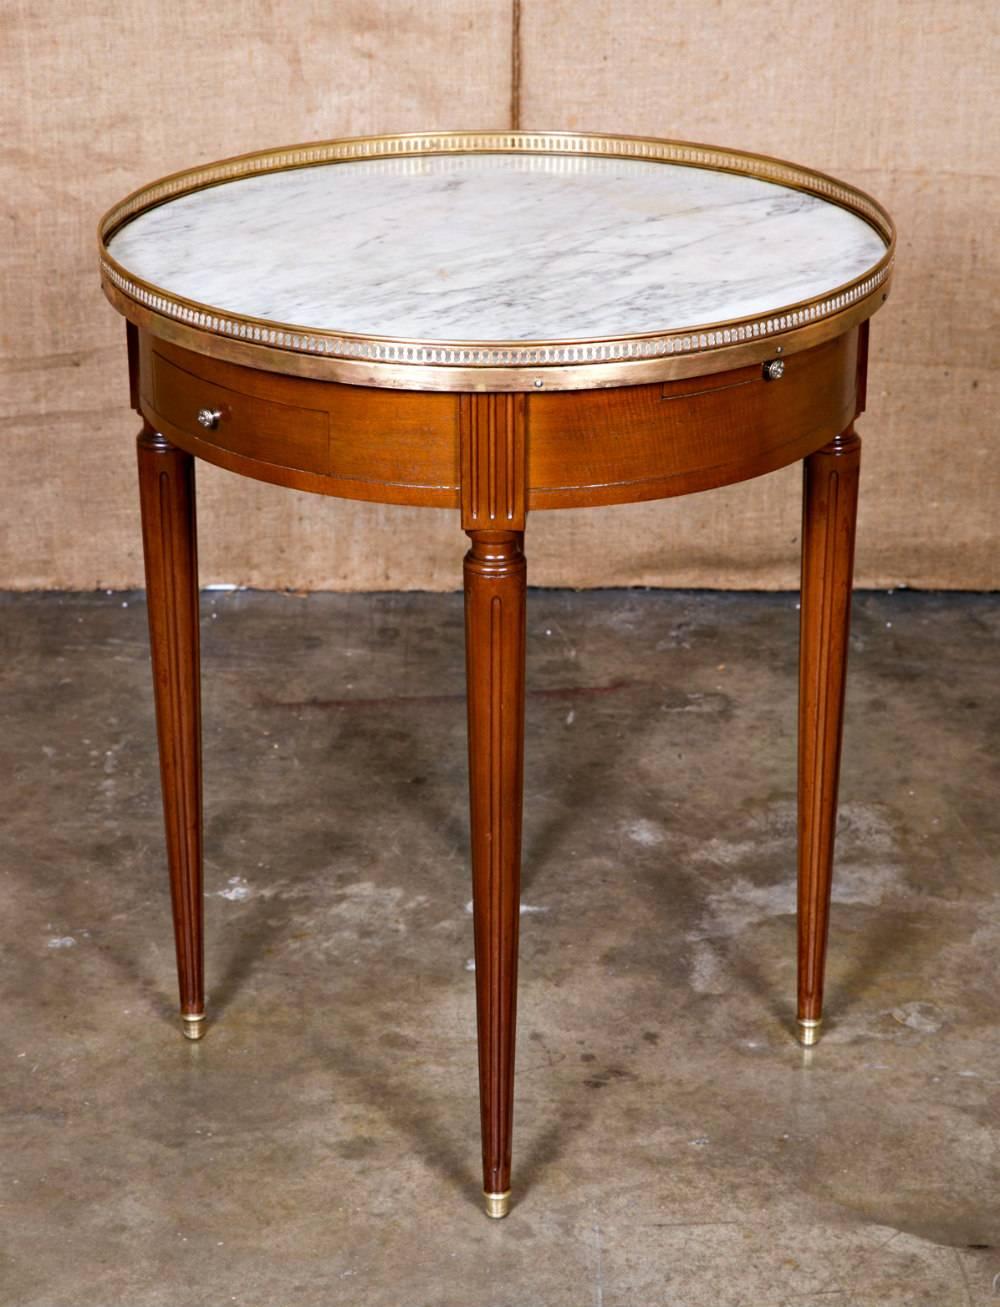 Handsome Louis XVI style bouillotte table in mahogany with a Carrara marble top surrounded by a pierced brass gallery. The apron has two drawers for cards and chips and two tirettes (pull-out utility slides) with embossed leather tops that were